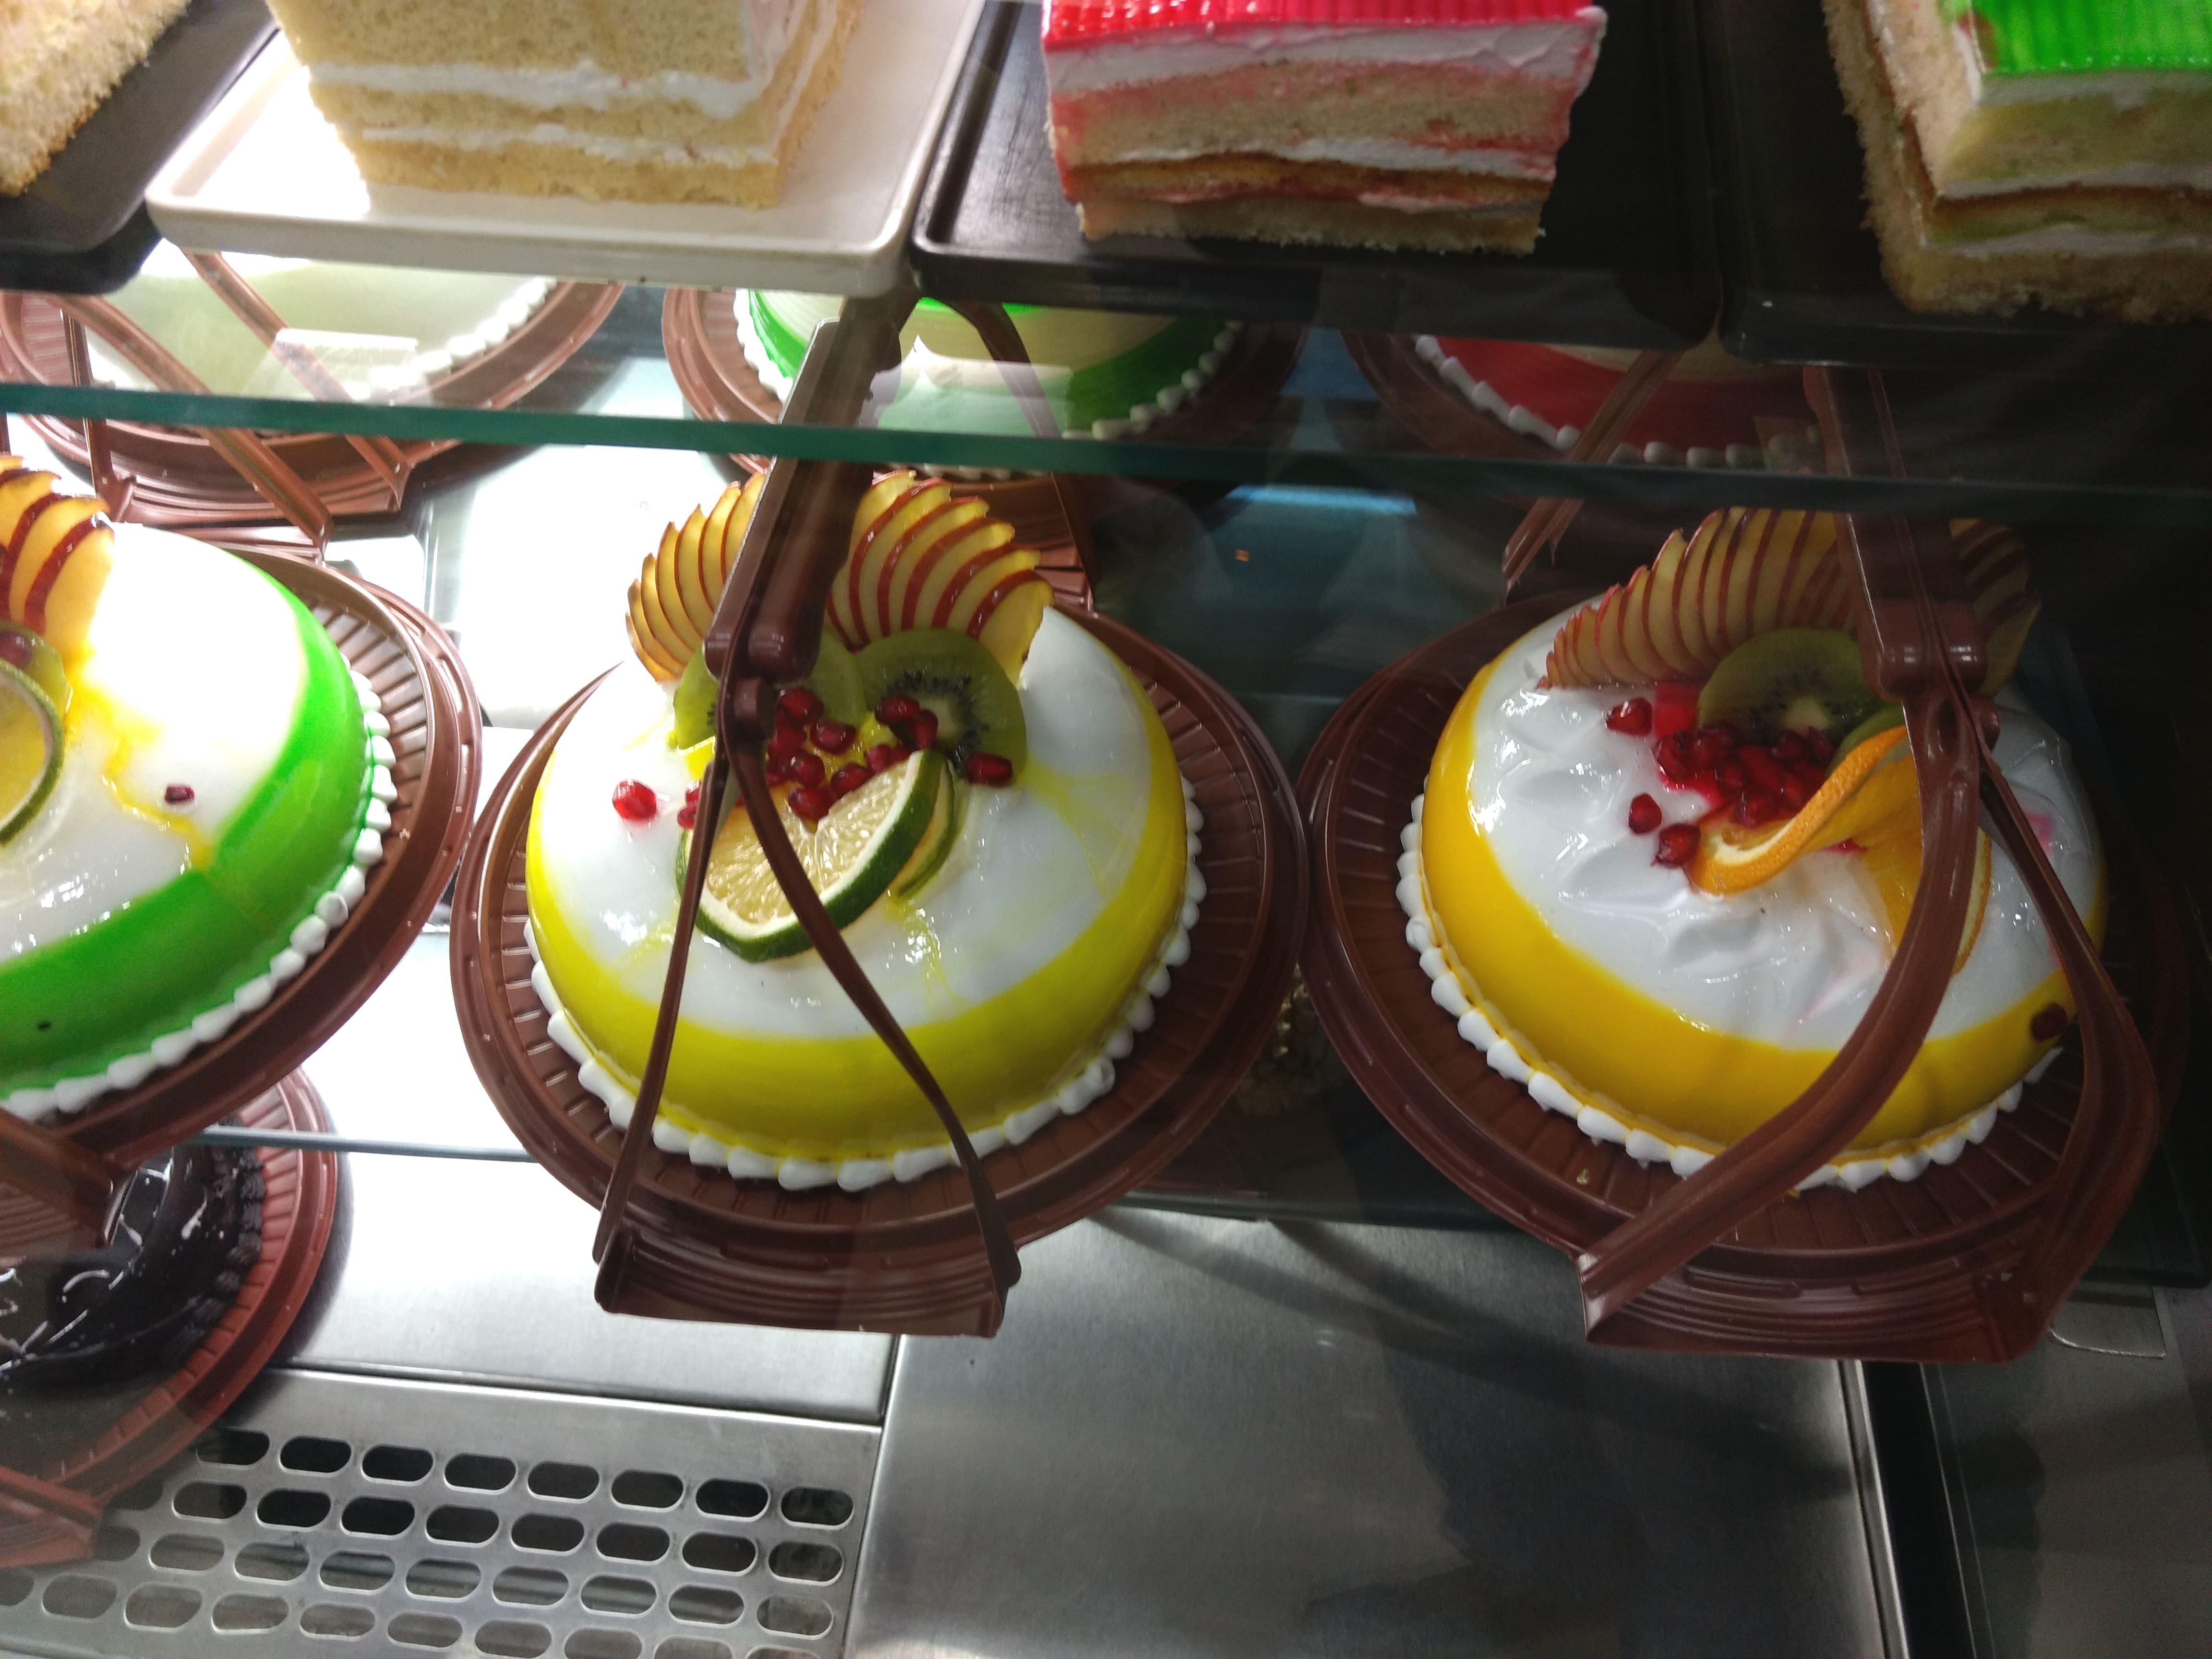 Save 5% on THE CAKE AND CREAM BAKERS AND CONFECTIONERS, Marunji, Pune, Cake,  Bakery, Pastry - magicpin | September 2023